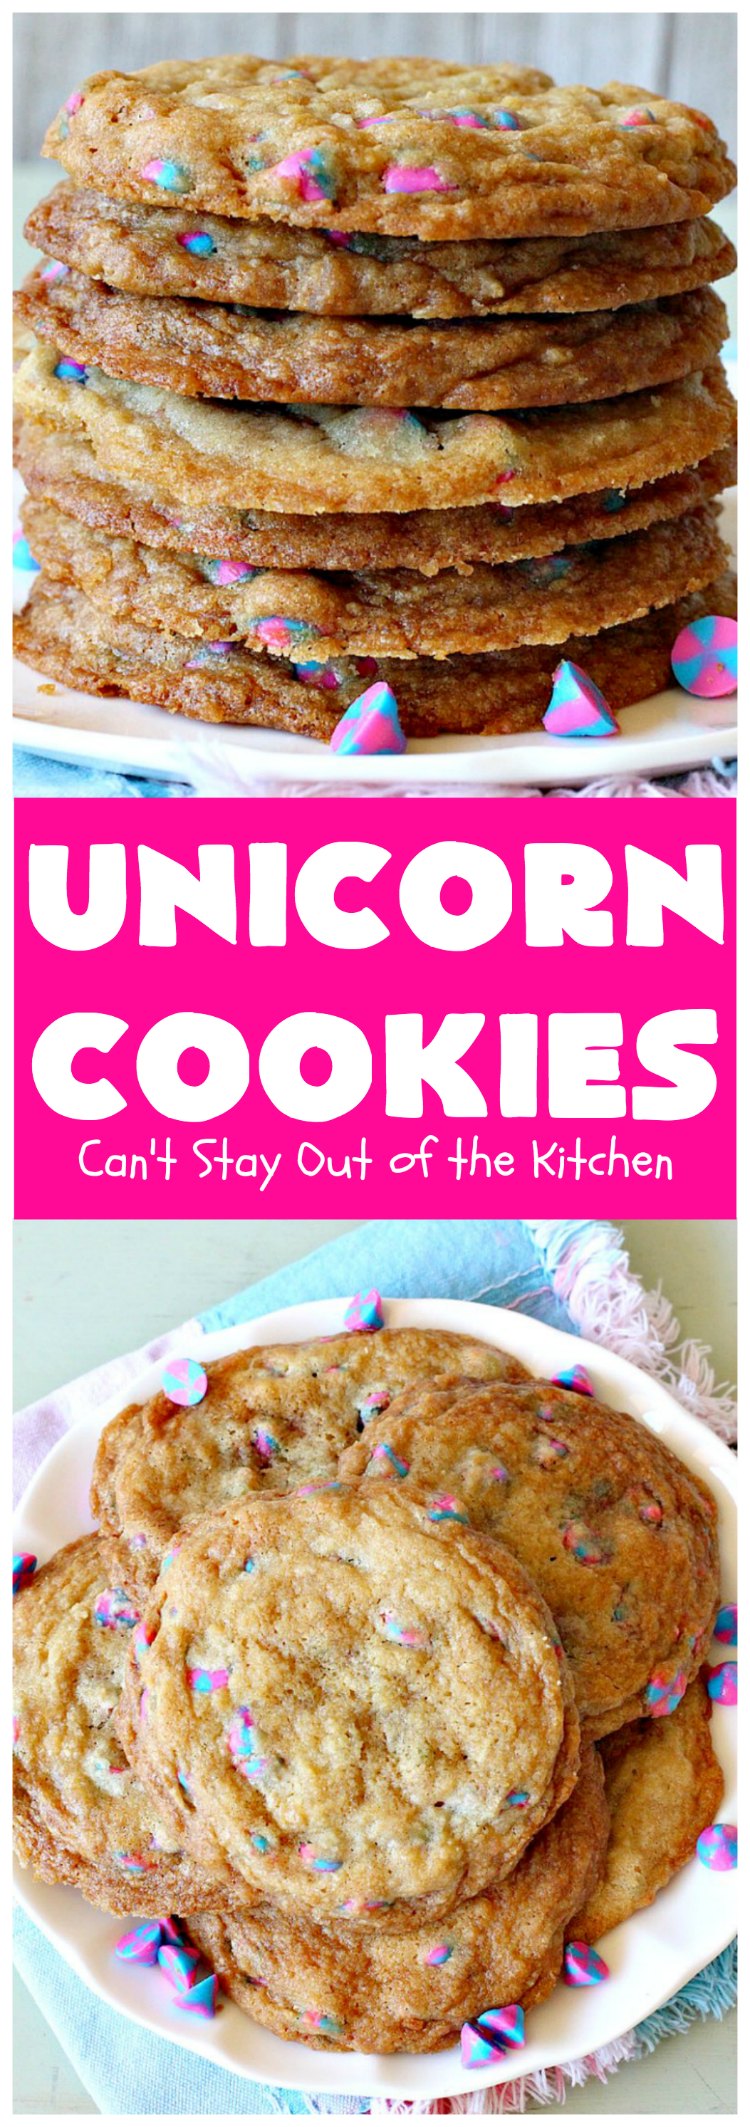 Unicorn Cookies | Can't Stay Out of the Kitchen | these adorable #cookies are made with #Nestles #Unicorn morsels. Terrific for #BirthdayParties or #holidays. #tailgating  #dessert #HolidayDessert #ChristmasCookieExchange #UnicornCookies